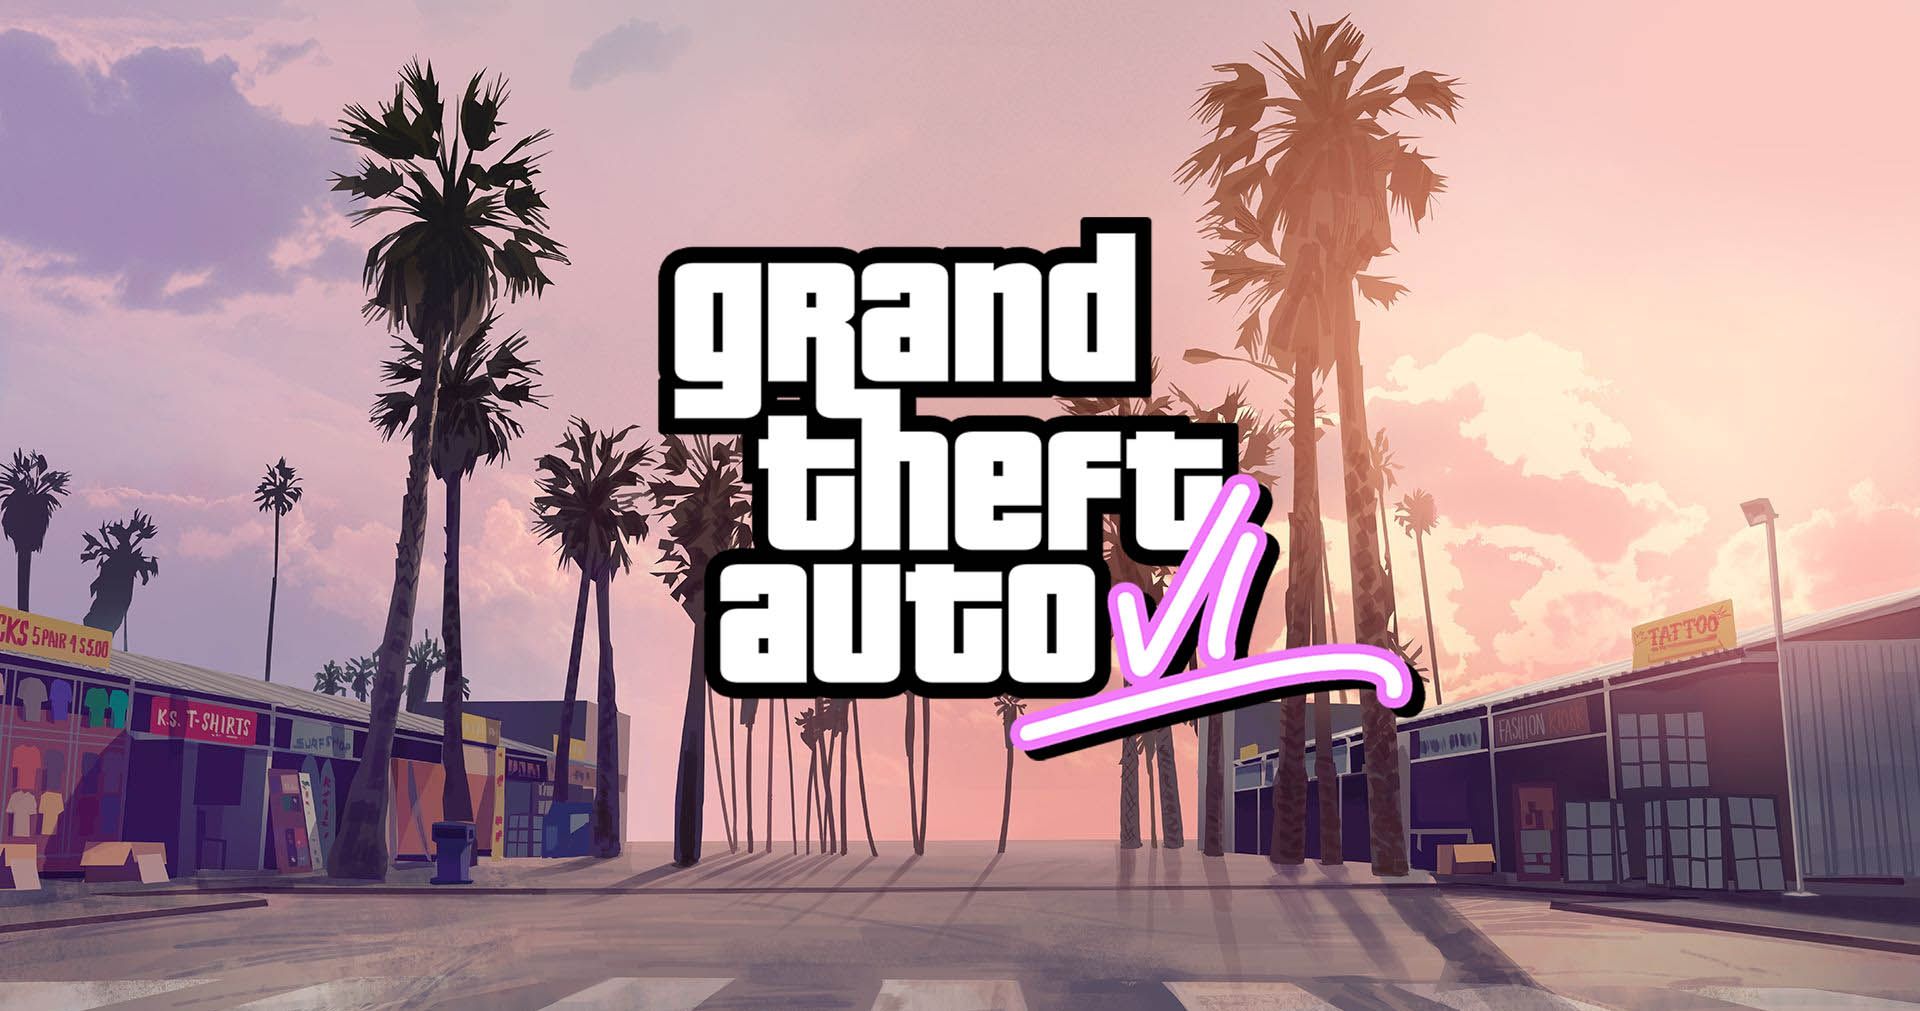 when did grand theft auto 6 come out